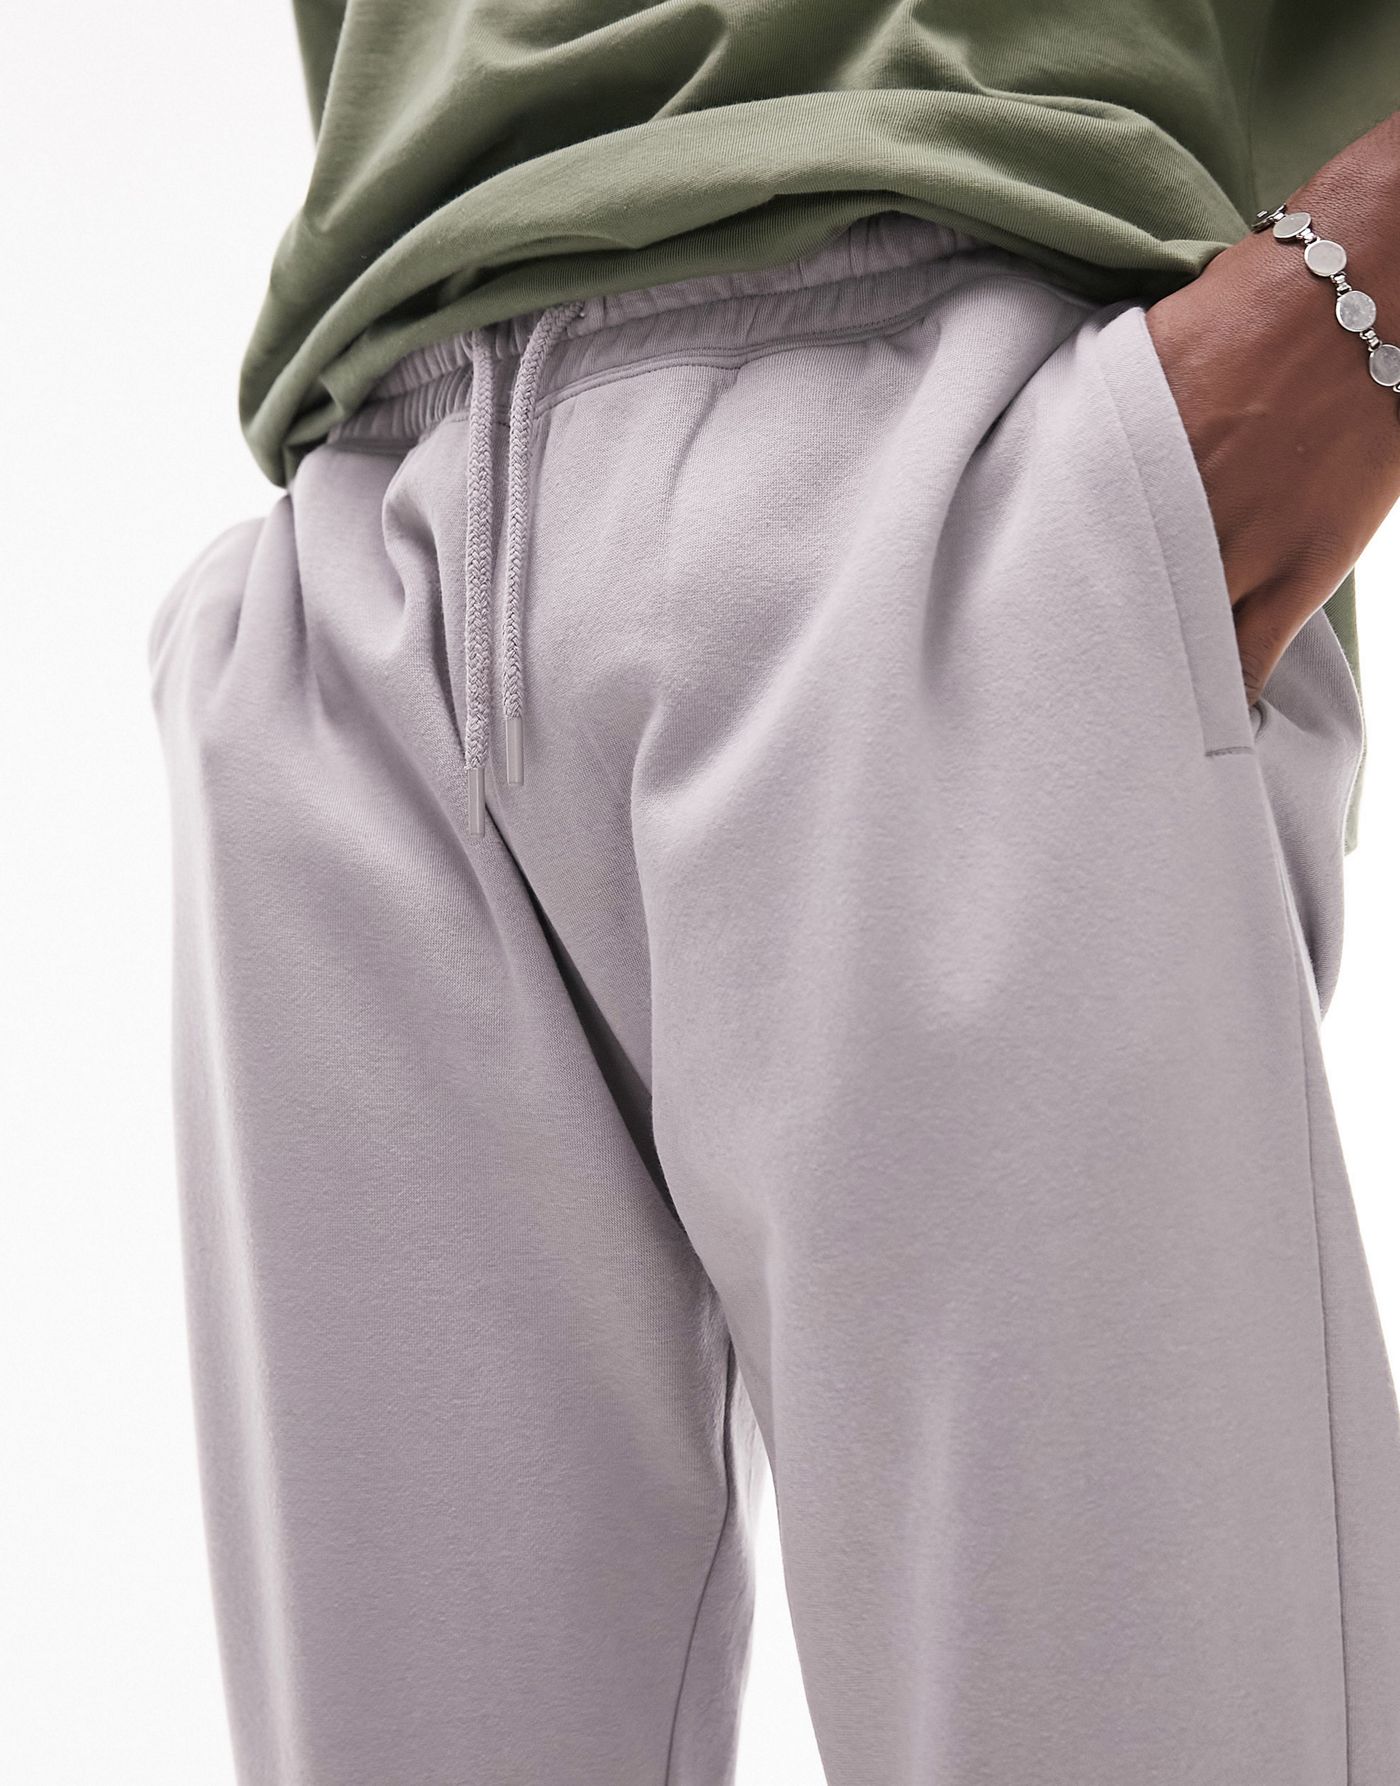 Topman 2 pack jogger in black and grey